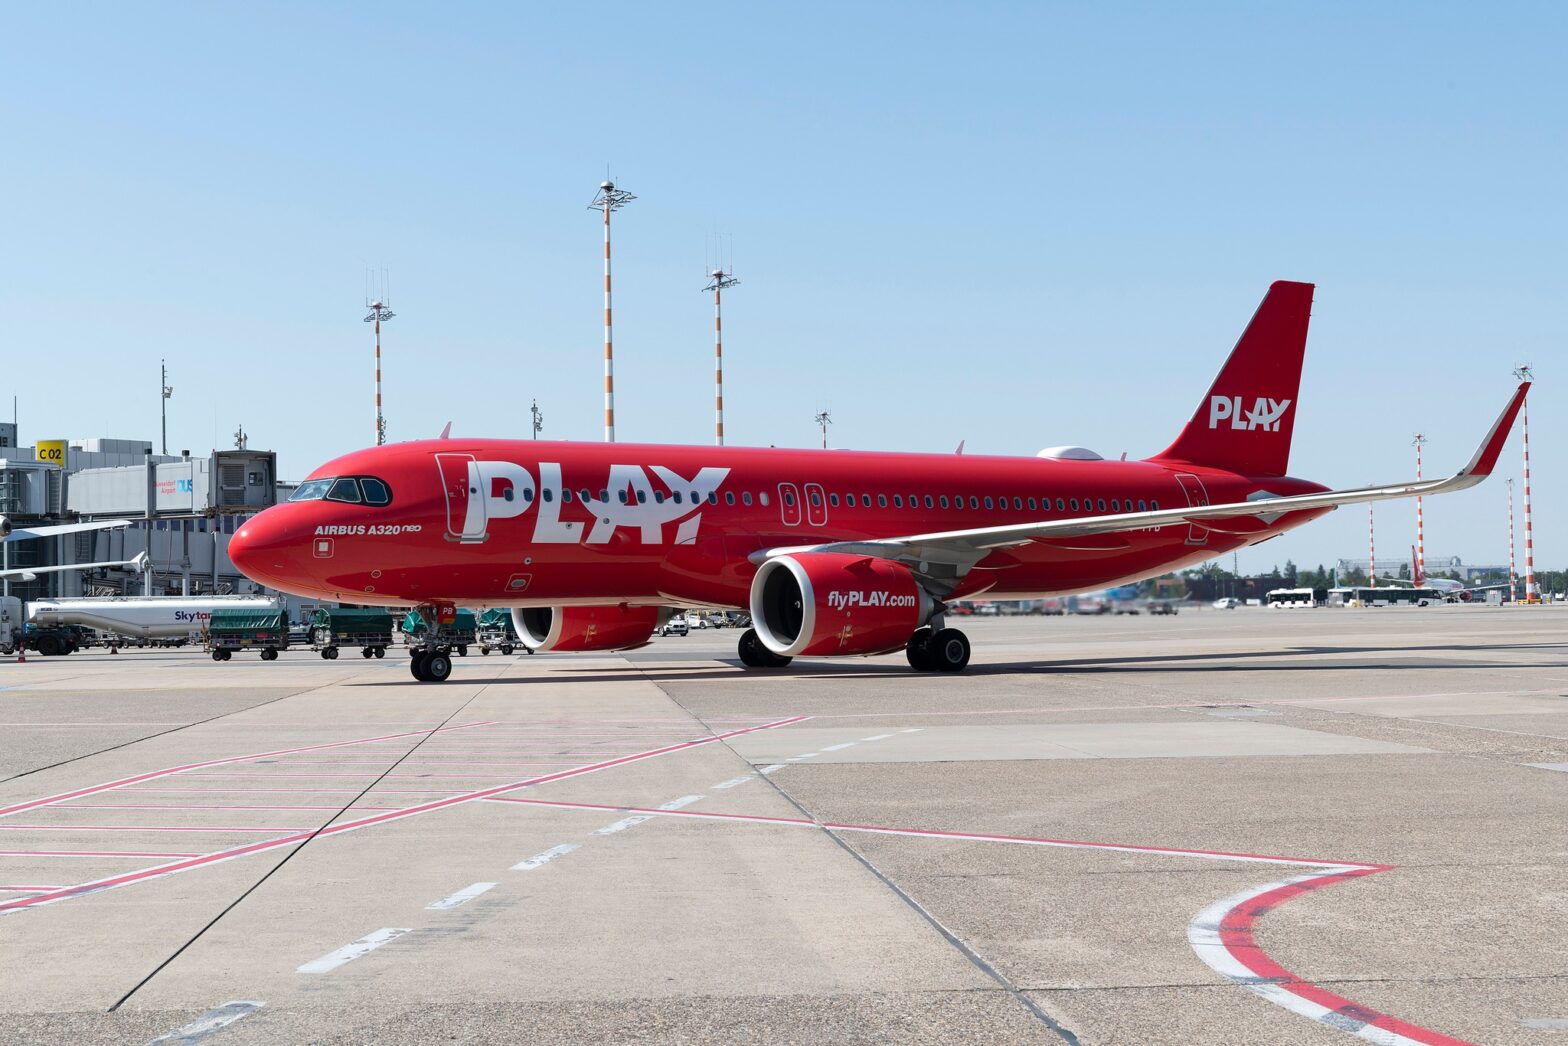 PLAY Airlines Trials Blueview Digital Services Platform, Adding Entertainment To Their Flight Experience